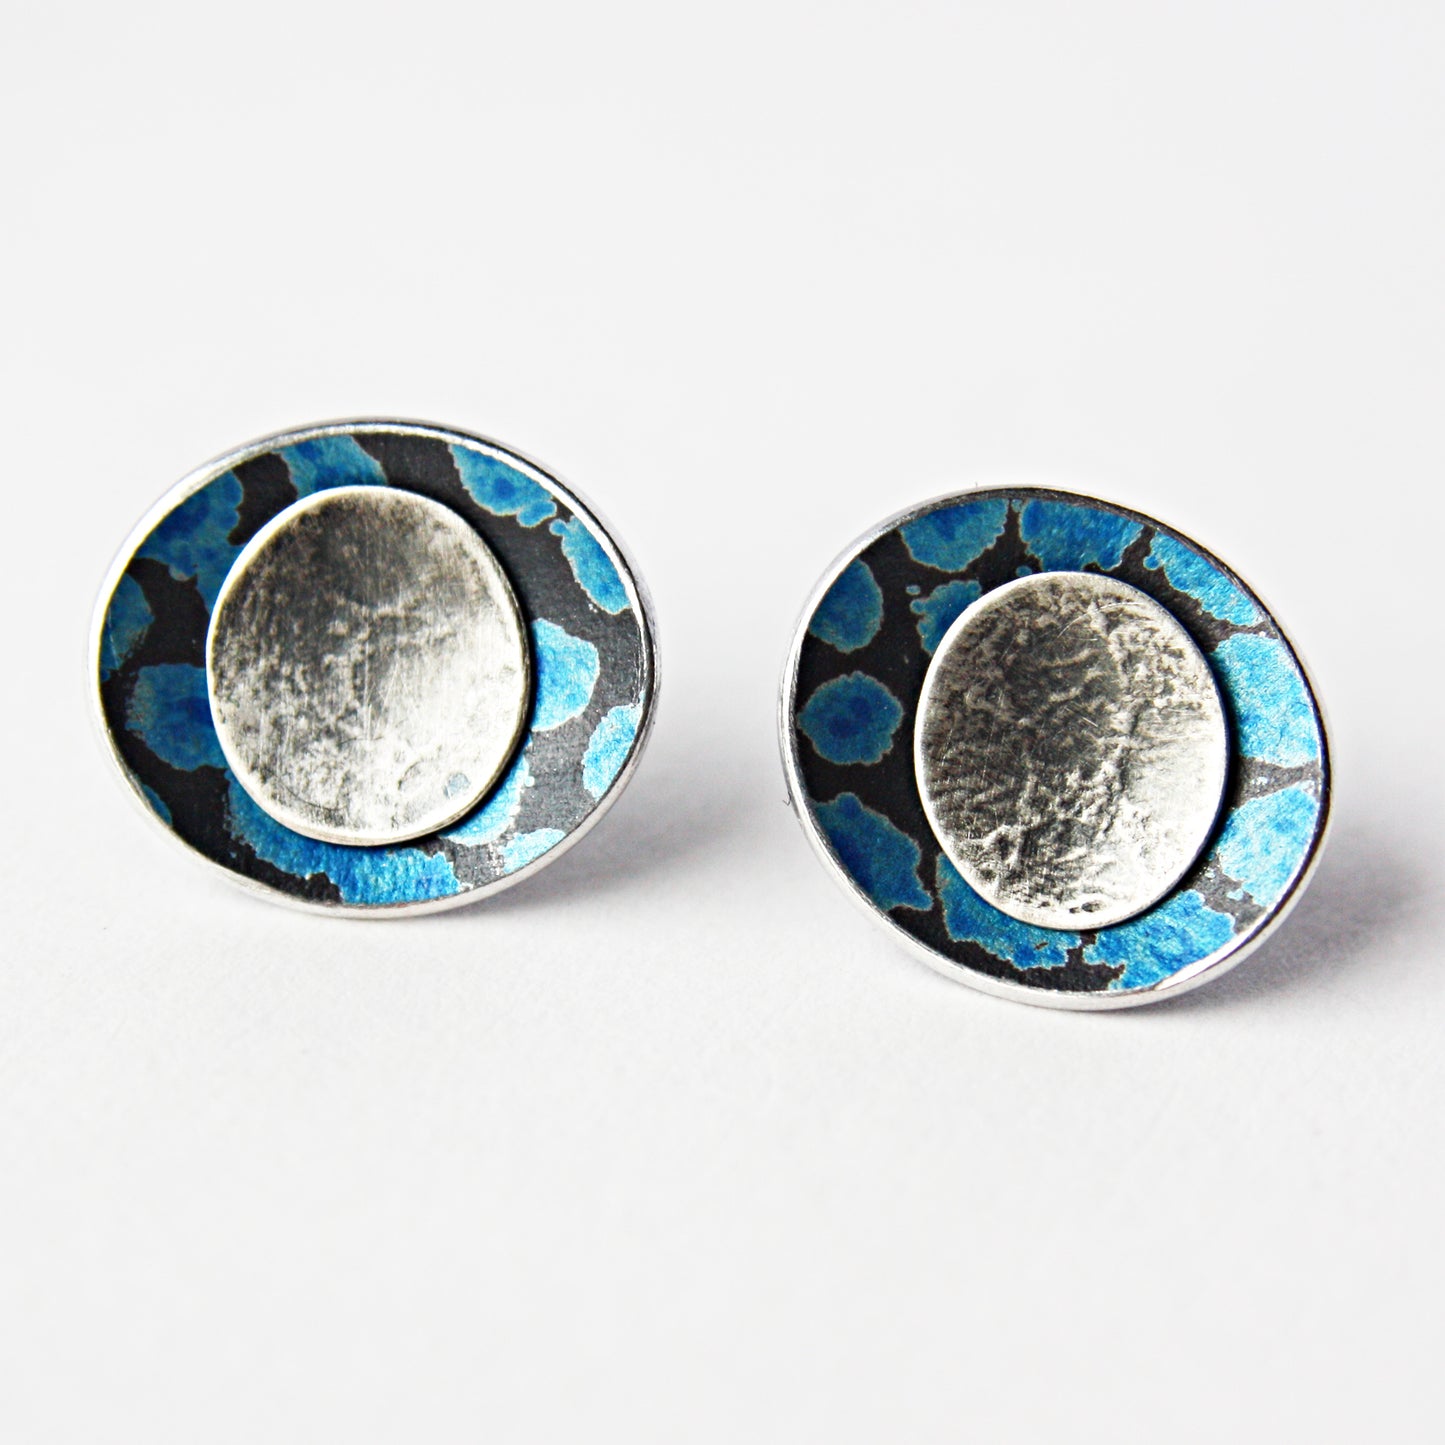 SL37 Spotty petrol blue concave oval stud earrings with silver centre